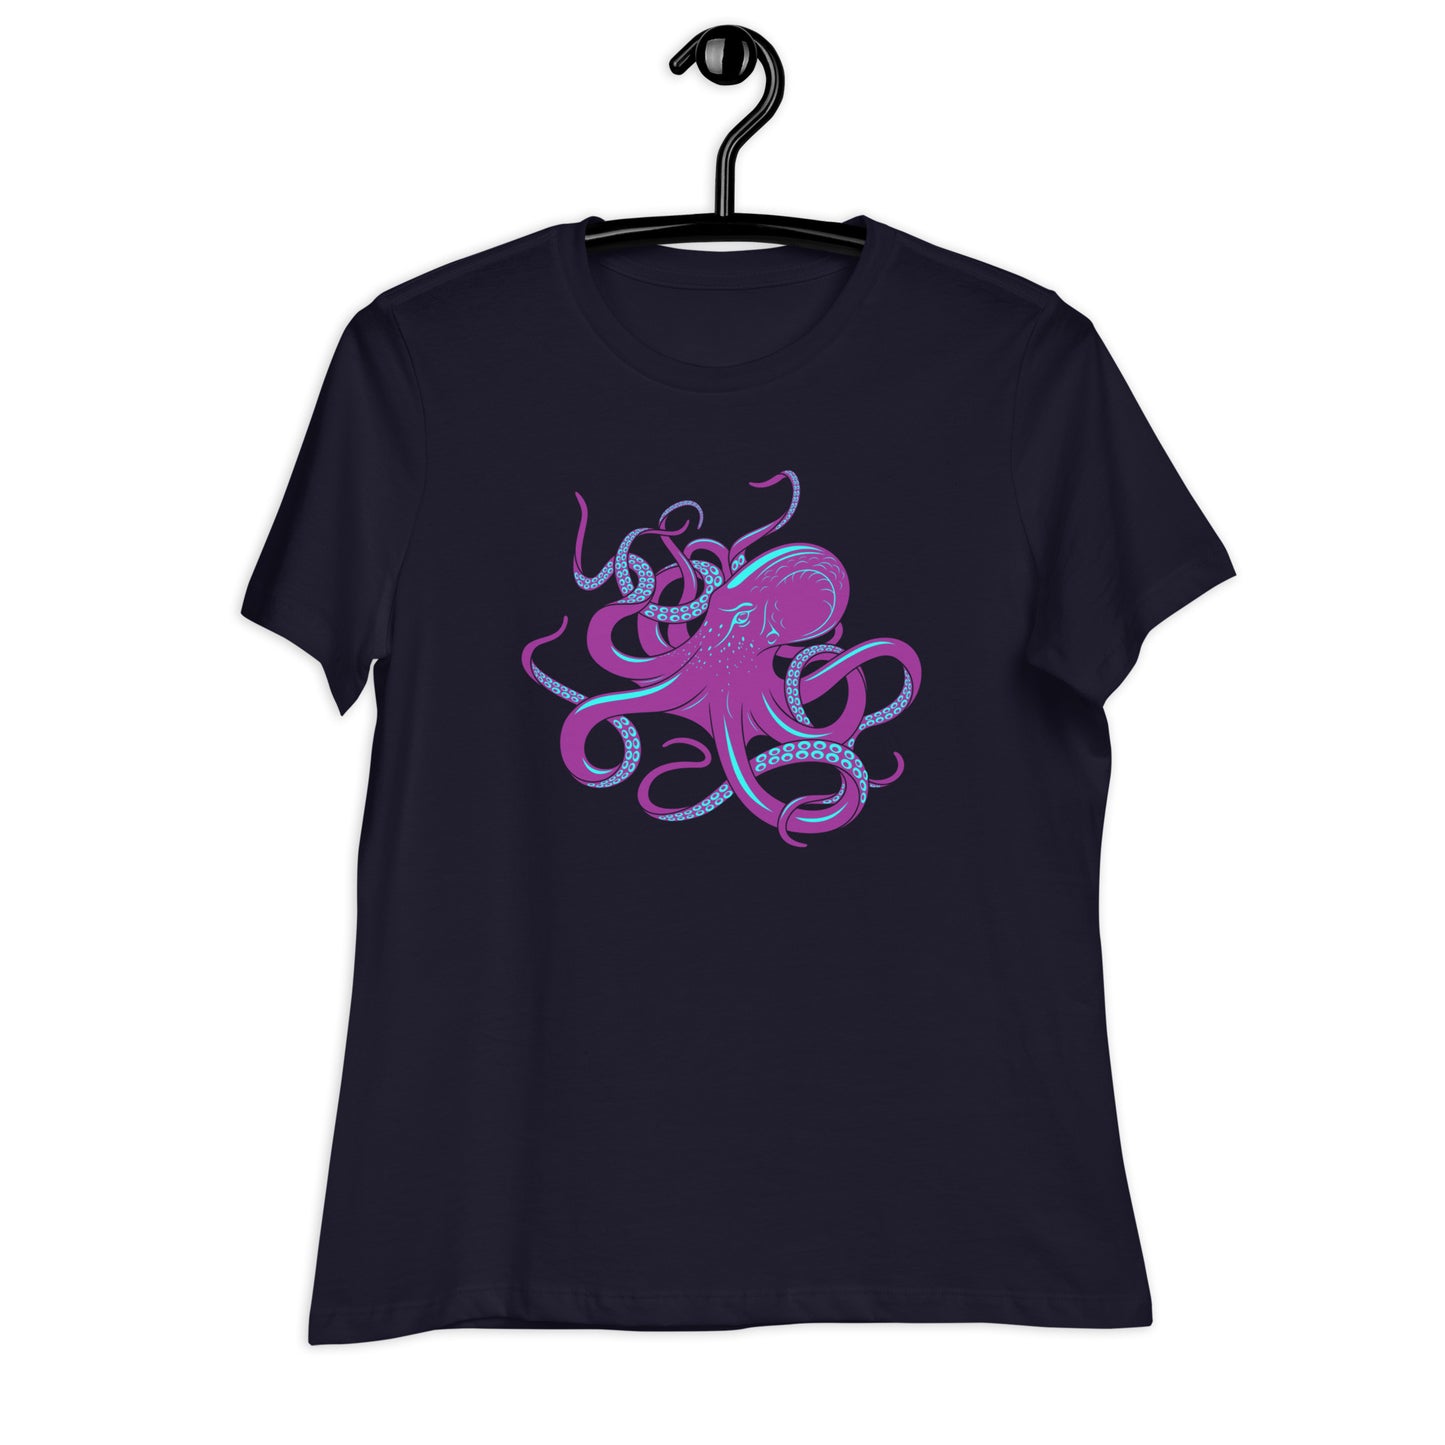 Women's Relaxed Soft & Smooth Premium Quality T-Shirt Cool Octopus Design by IOBI Original Apparel